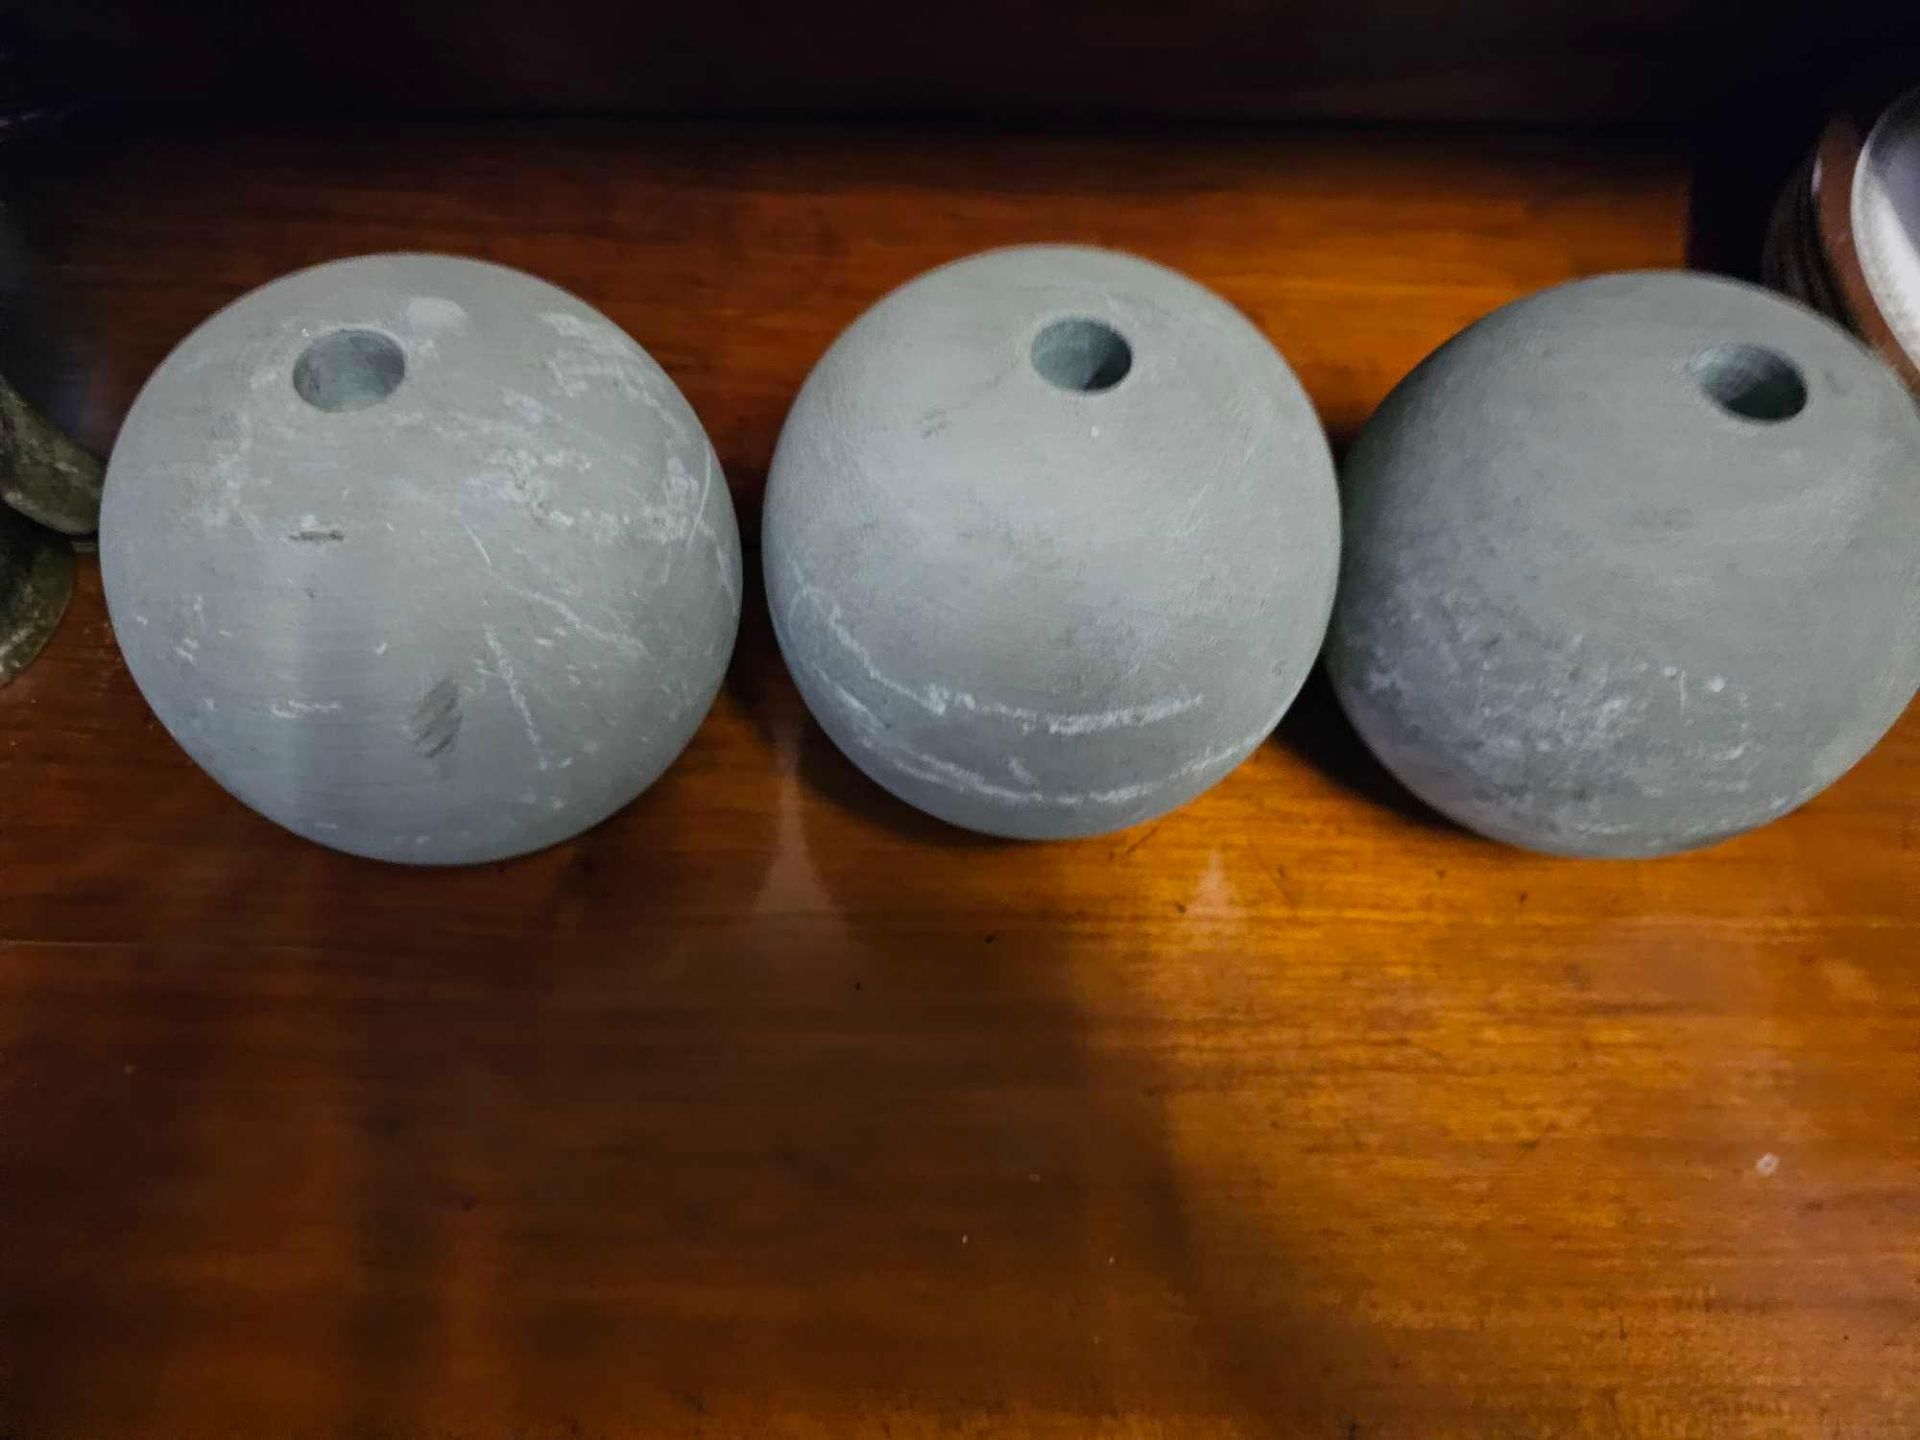 3 x Round Stone Ball Sphere Objets 17cm - Image 2 of 3